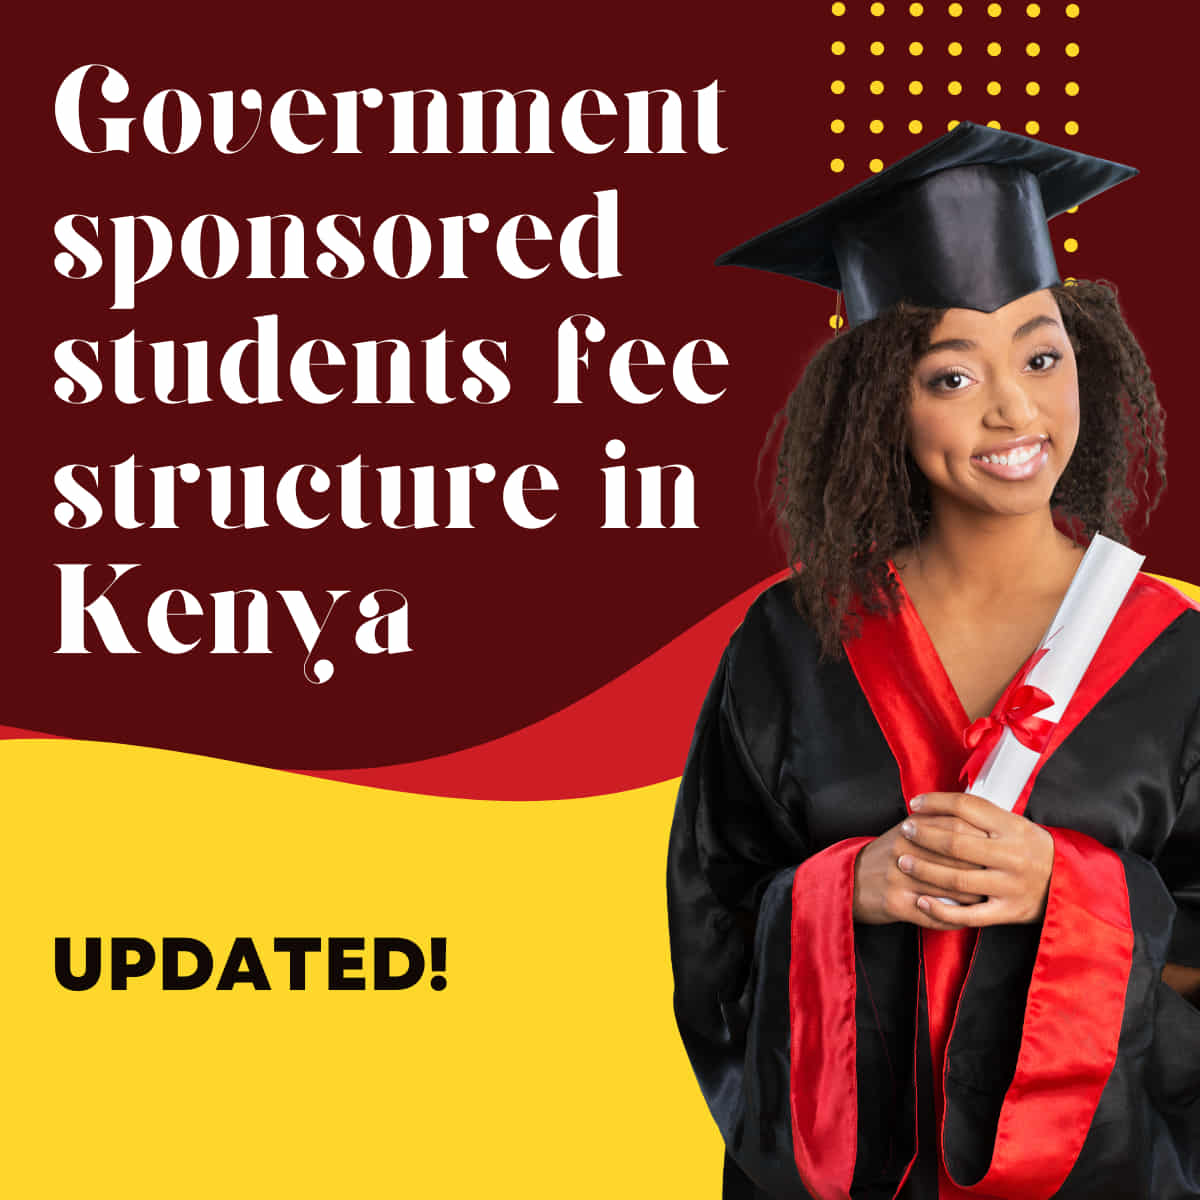 Government sponsored students fee structure in Kenya